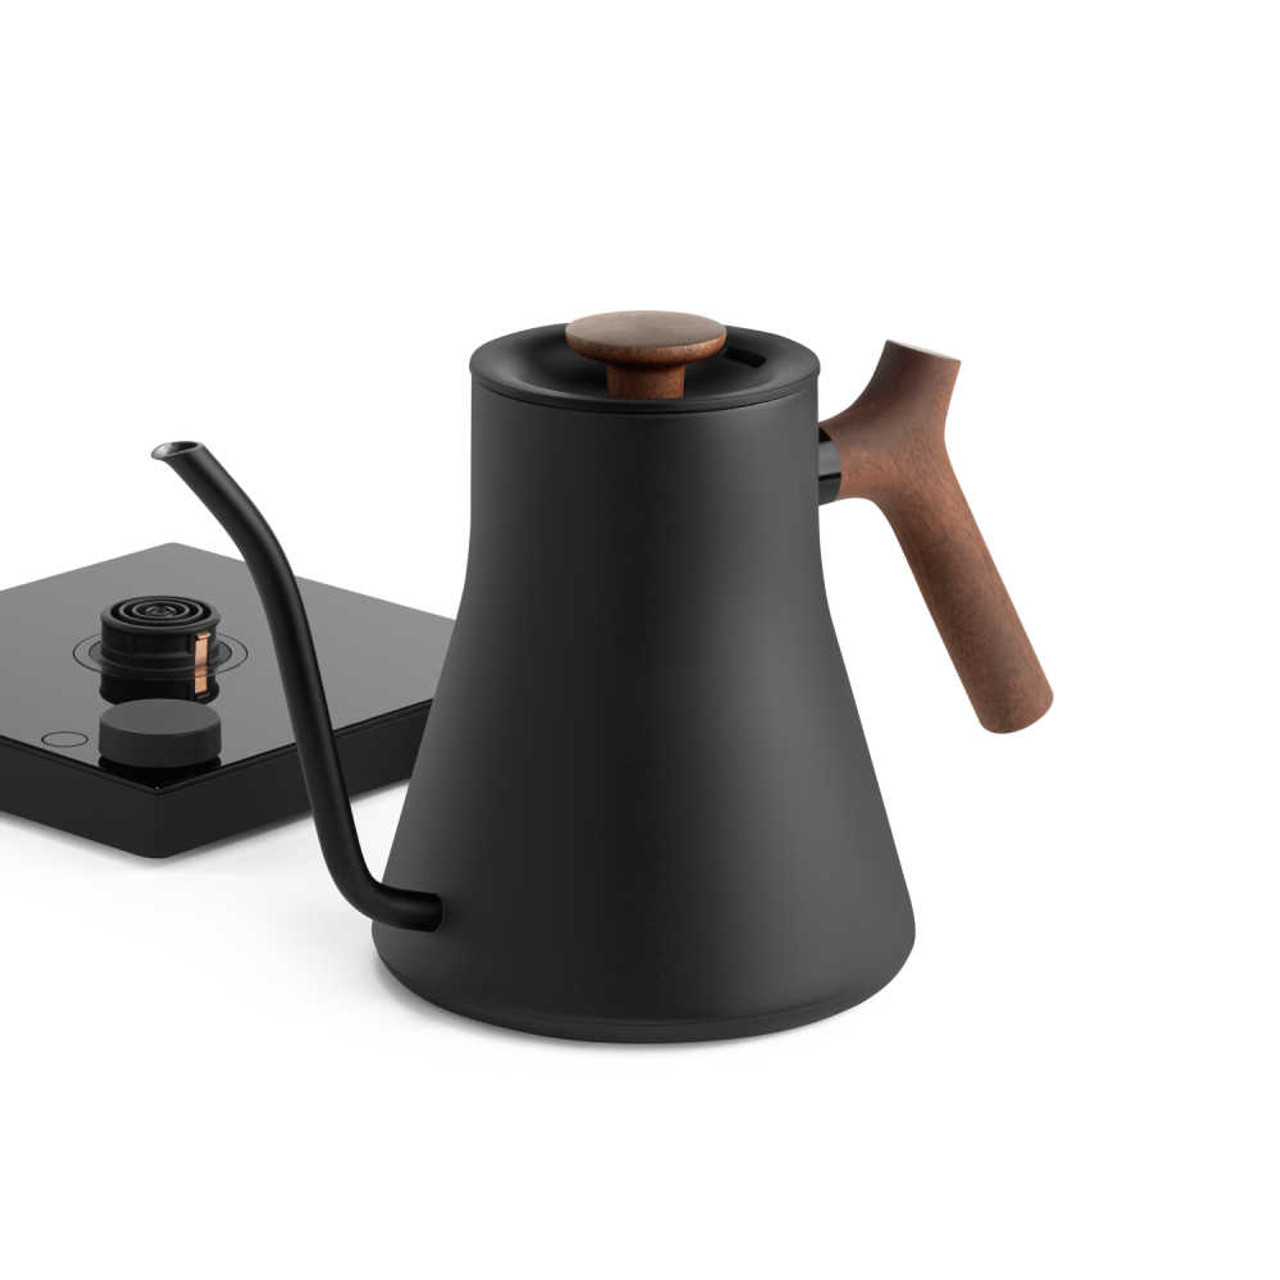 https://cdn11.bigcommerce.com/s-hccytny0od/images/stencil/1280x1280/products/5591/24431/Fellow_Stagg_EKG_Pro_Studio_Electric_Kettle__77523.1692037030.jpg?c=2?imbypass=on